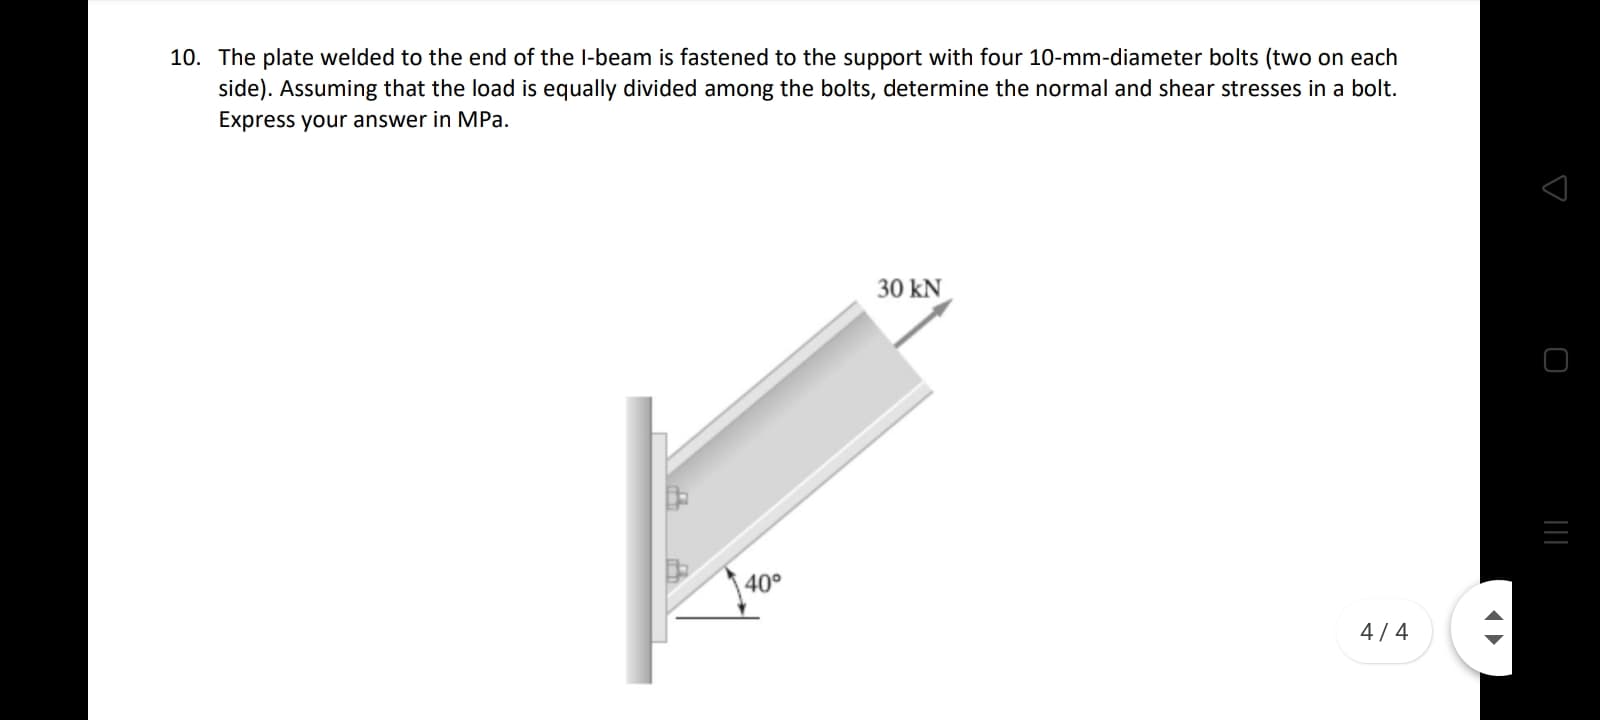 10. The plate welded to the end of the l-beam is fastened to the support with four 10-mm-diameter bolts (two on each
side). Assuming that the load is equally divided among the bolts, determine the normal and shear stresses in a bolt.
Express your answer in MPa.
